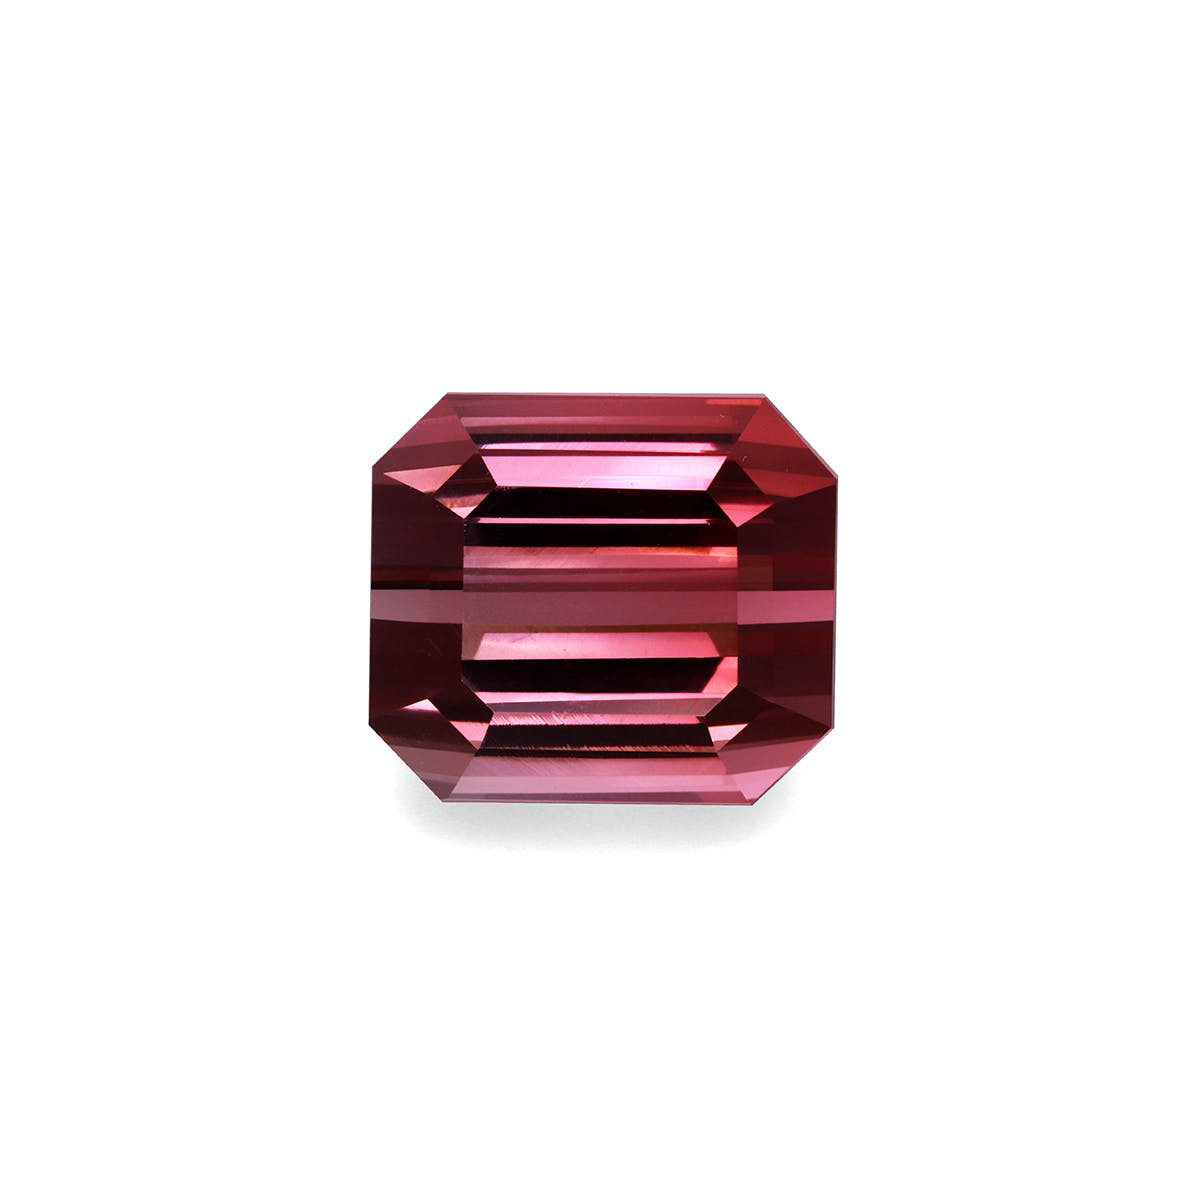 Picture of Rosewood Pink Tourmaline 54.69ct - 20x18mm (BT0042)